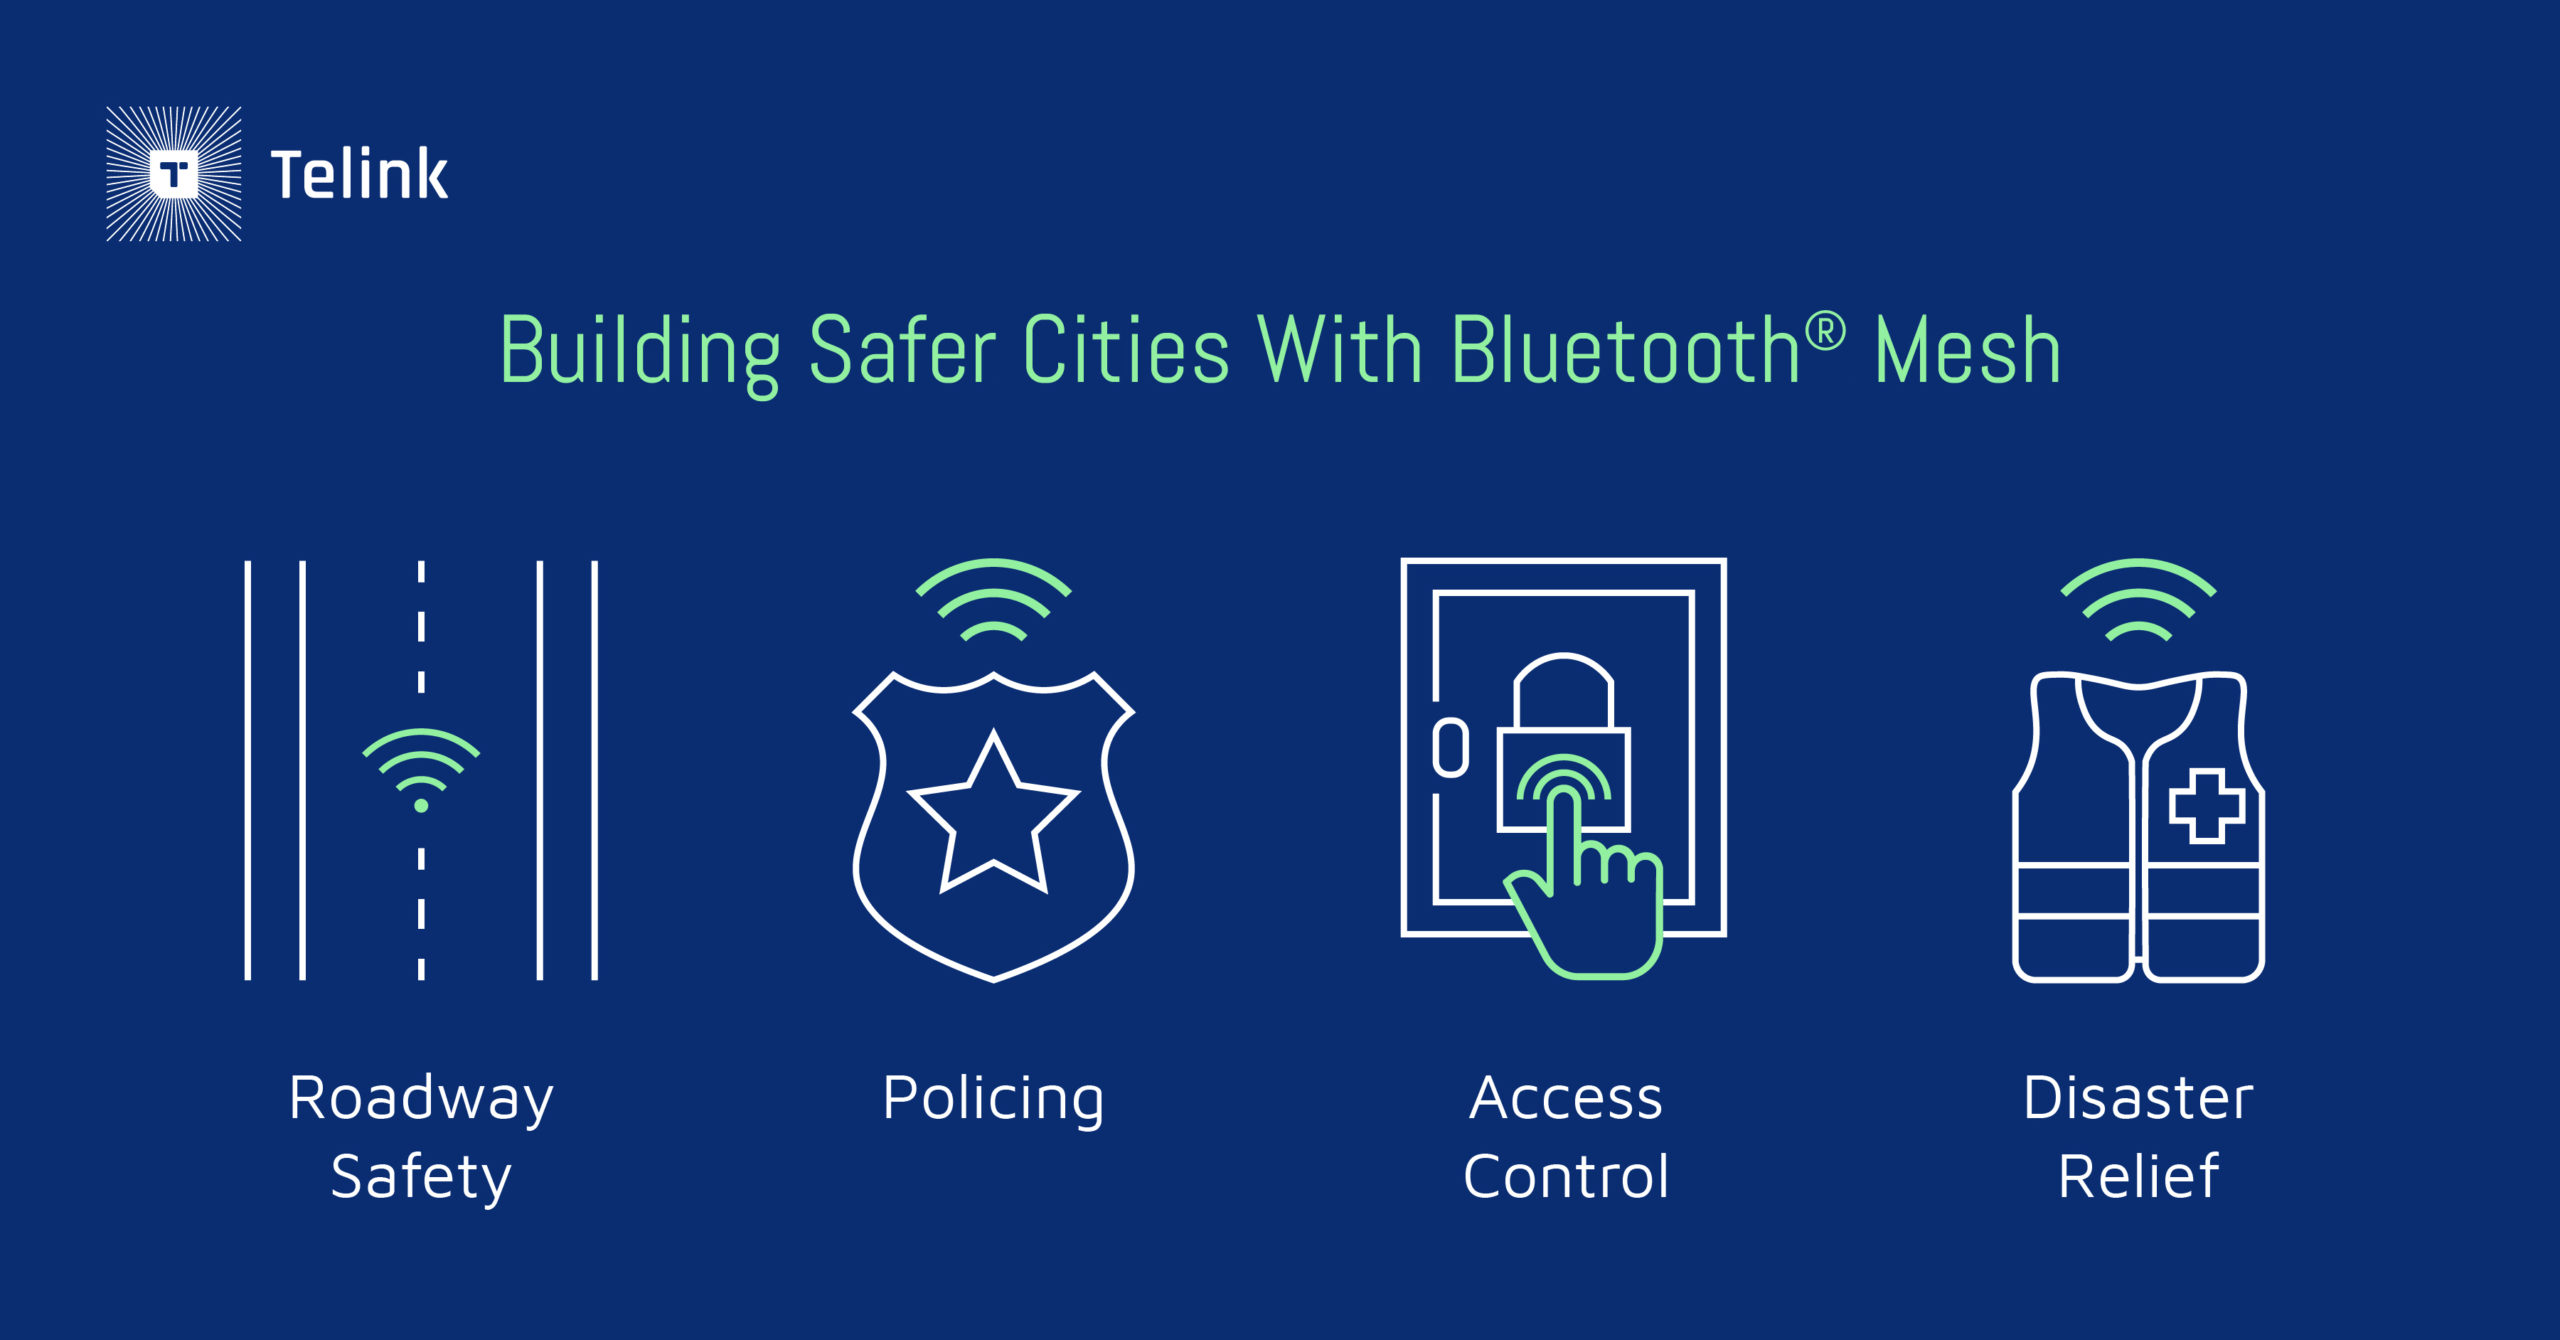 Building safer cities with Bluetooth Mesh